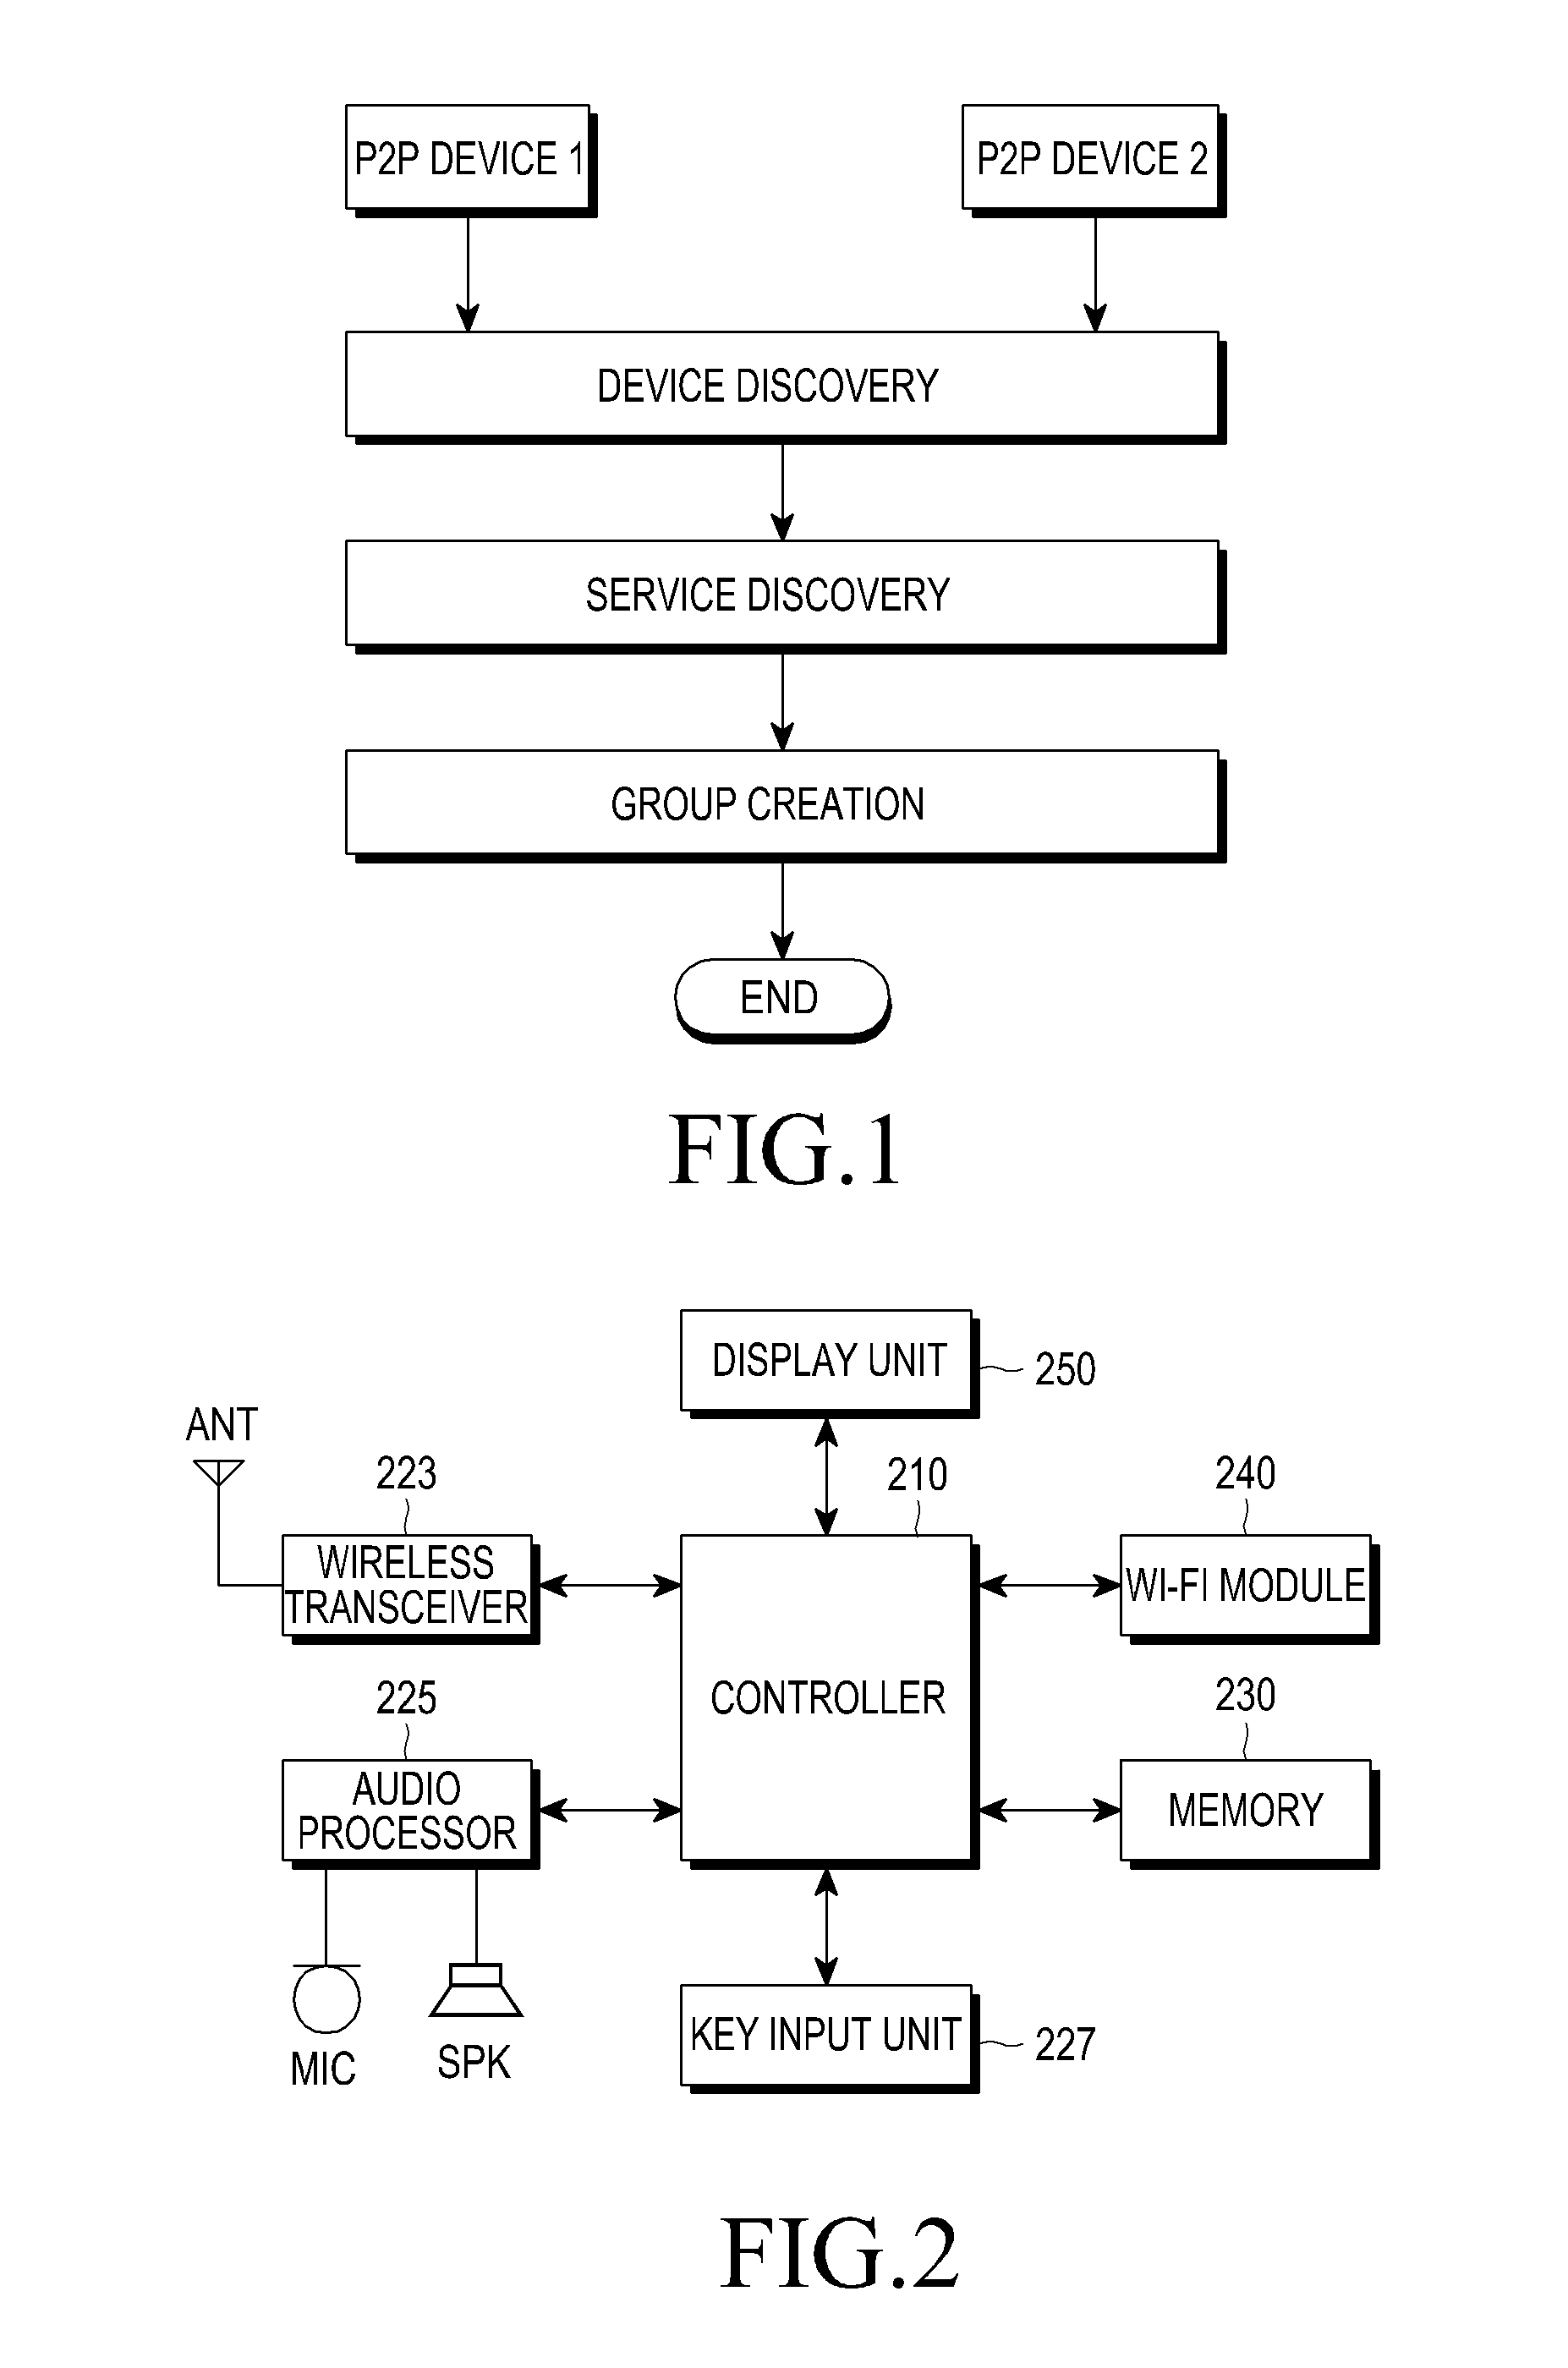 Method and apparatus for Wi-Fi connection using Wi-Fi protected setup in portable terminal